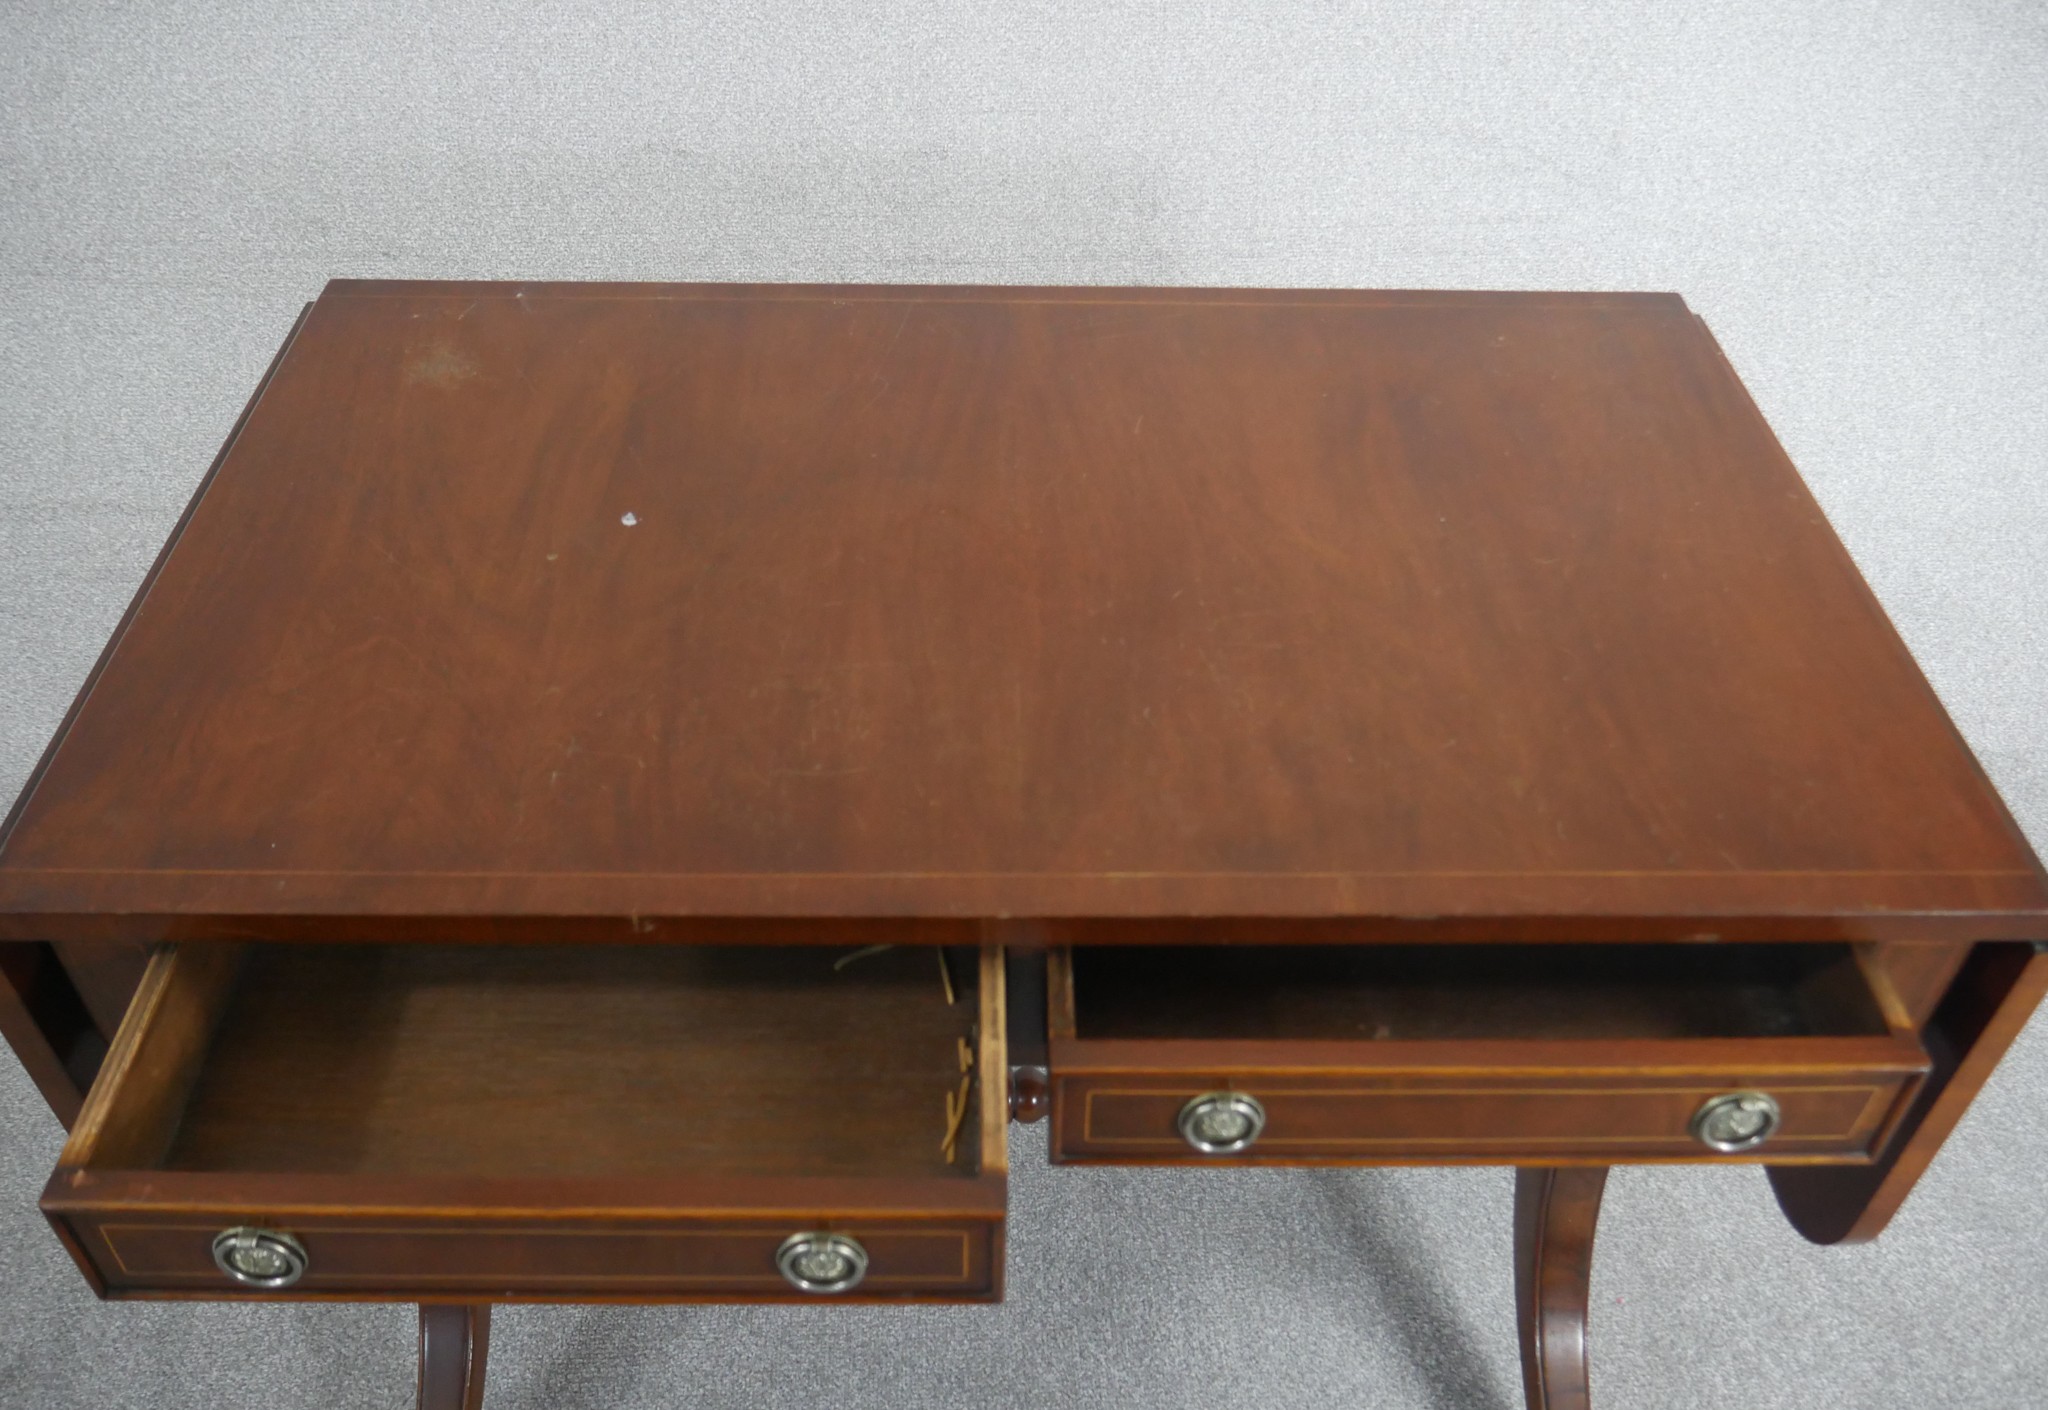 A George III style reproduction mahogany sofa table, with two drop leaves and two short drawers on - Image 3 of 5